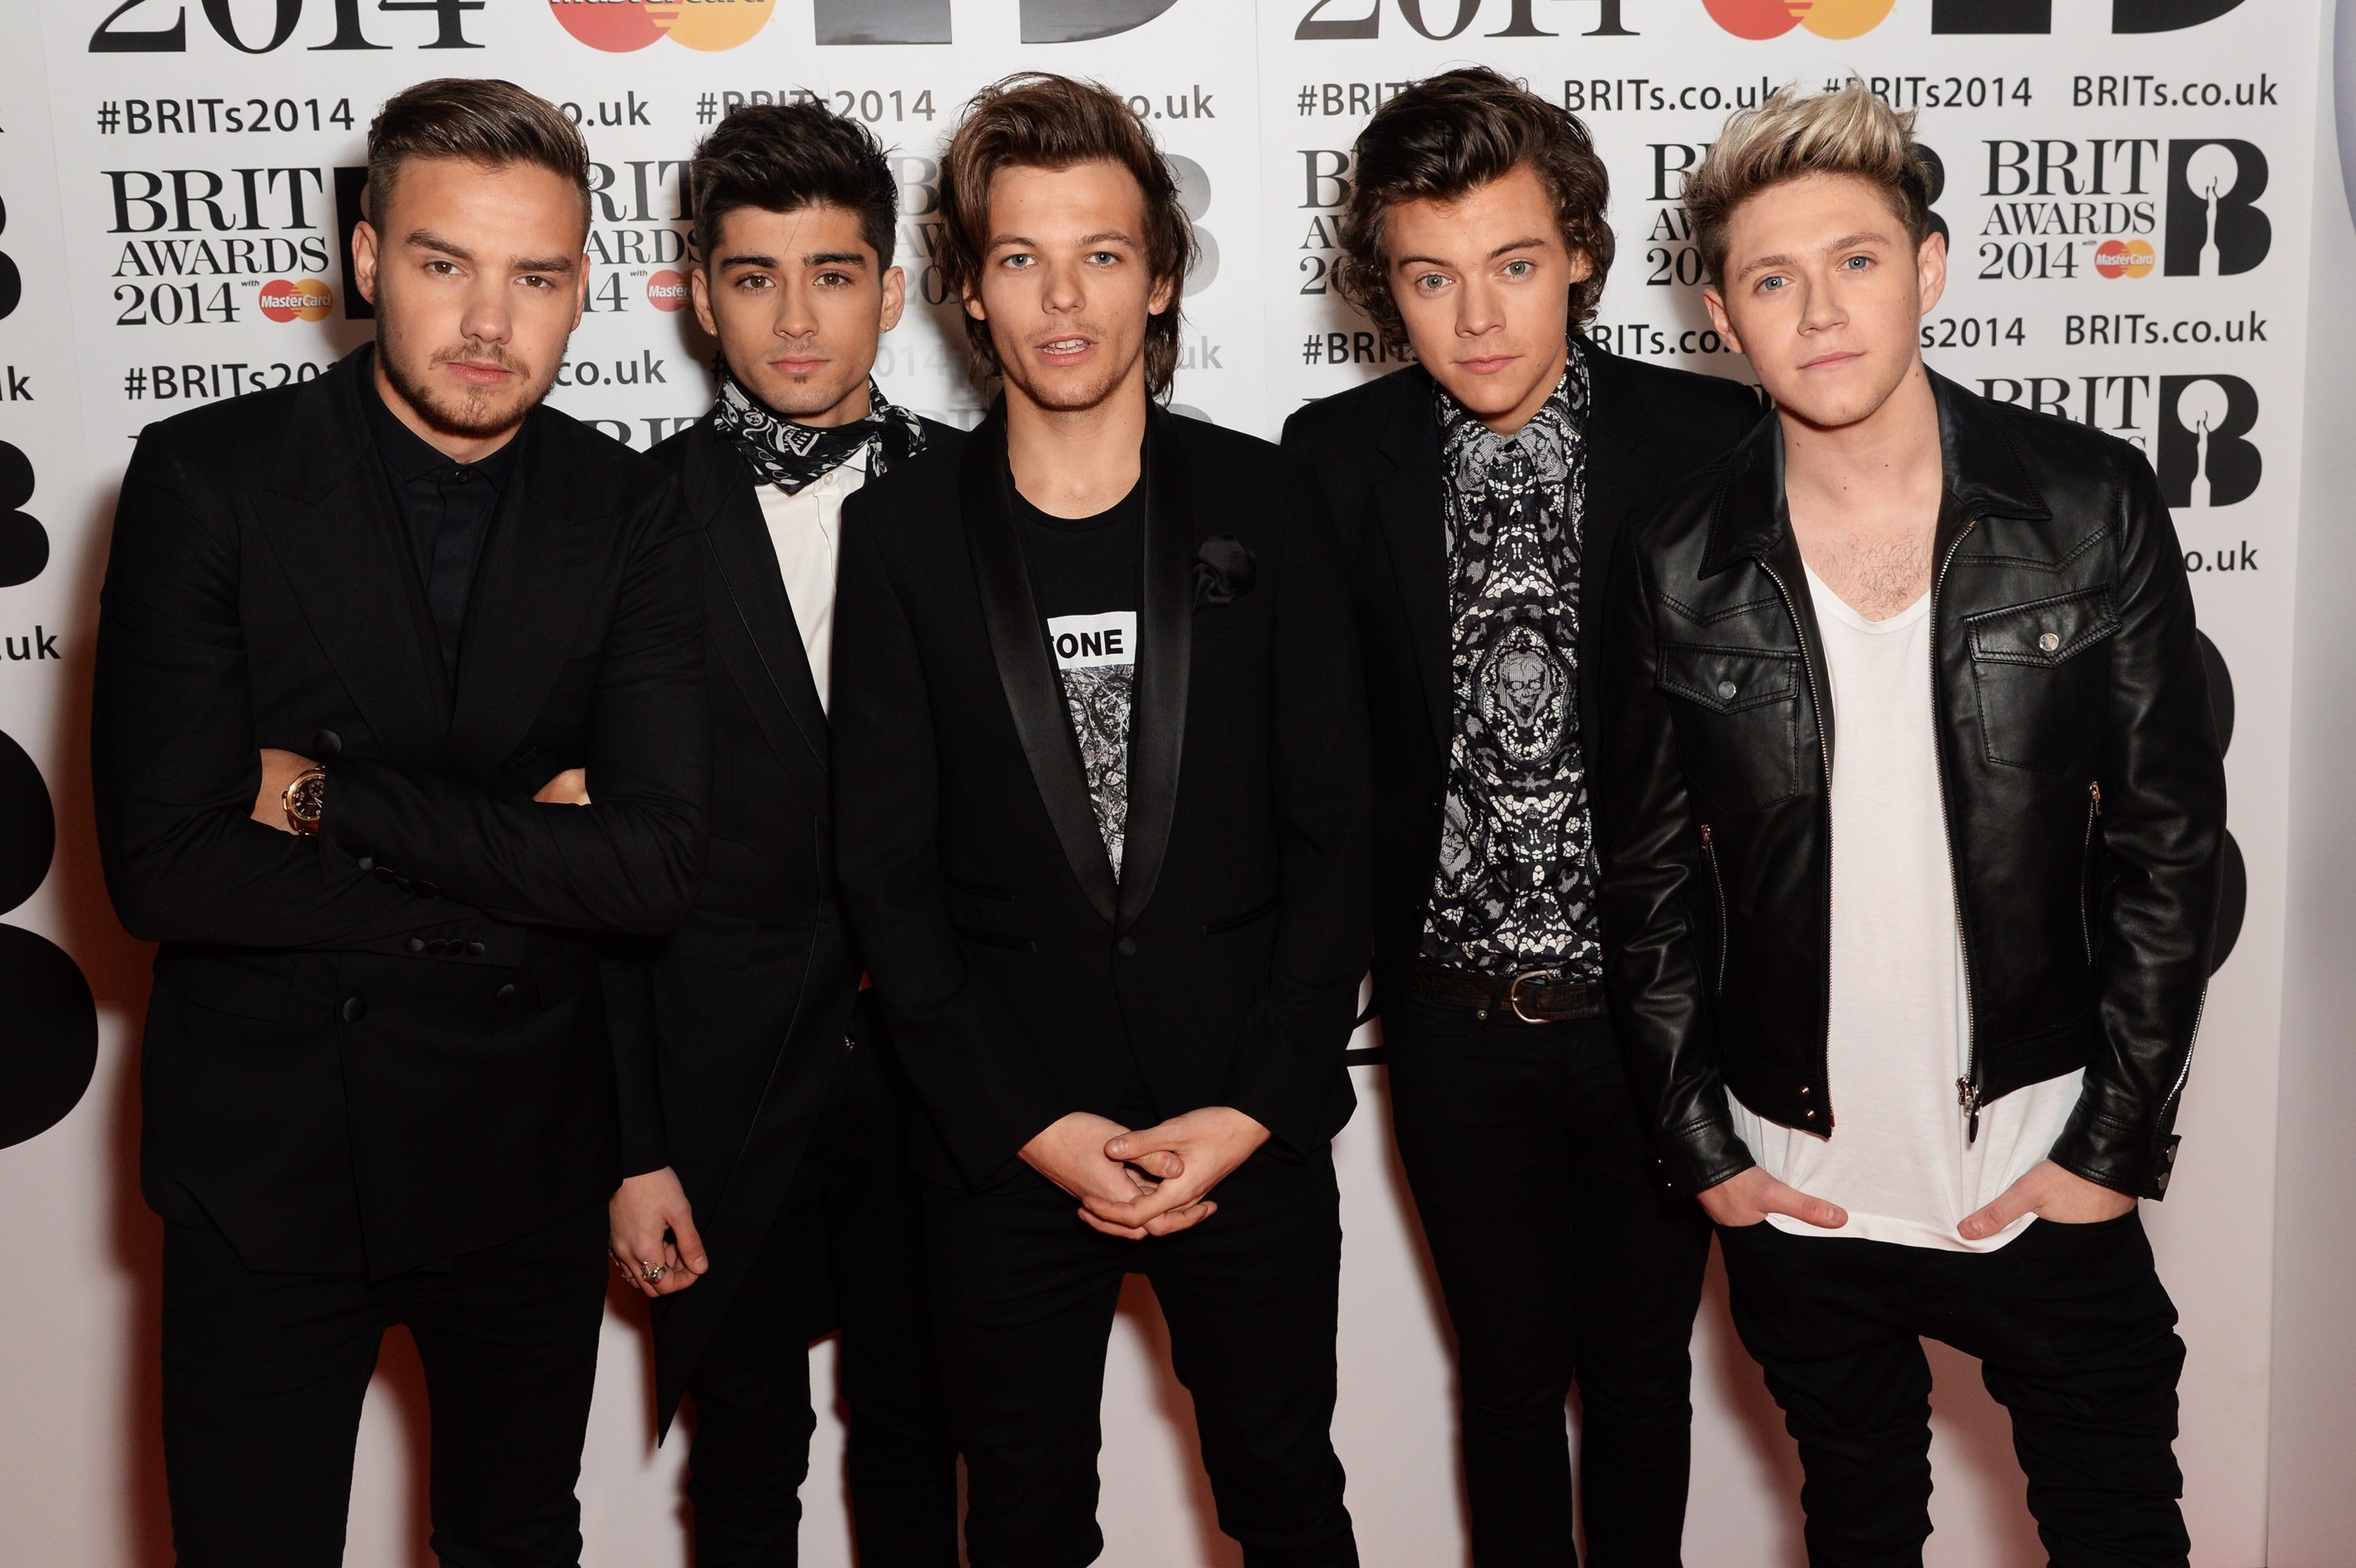 One Direction Sued By Singer Dave Lewis Over “Story of My Life” Song